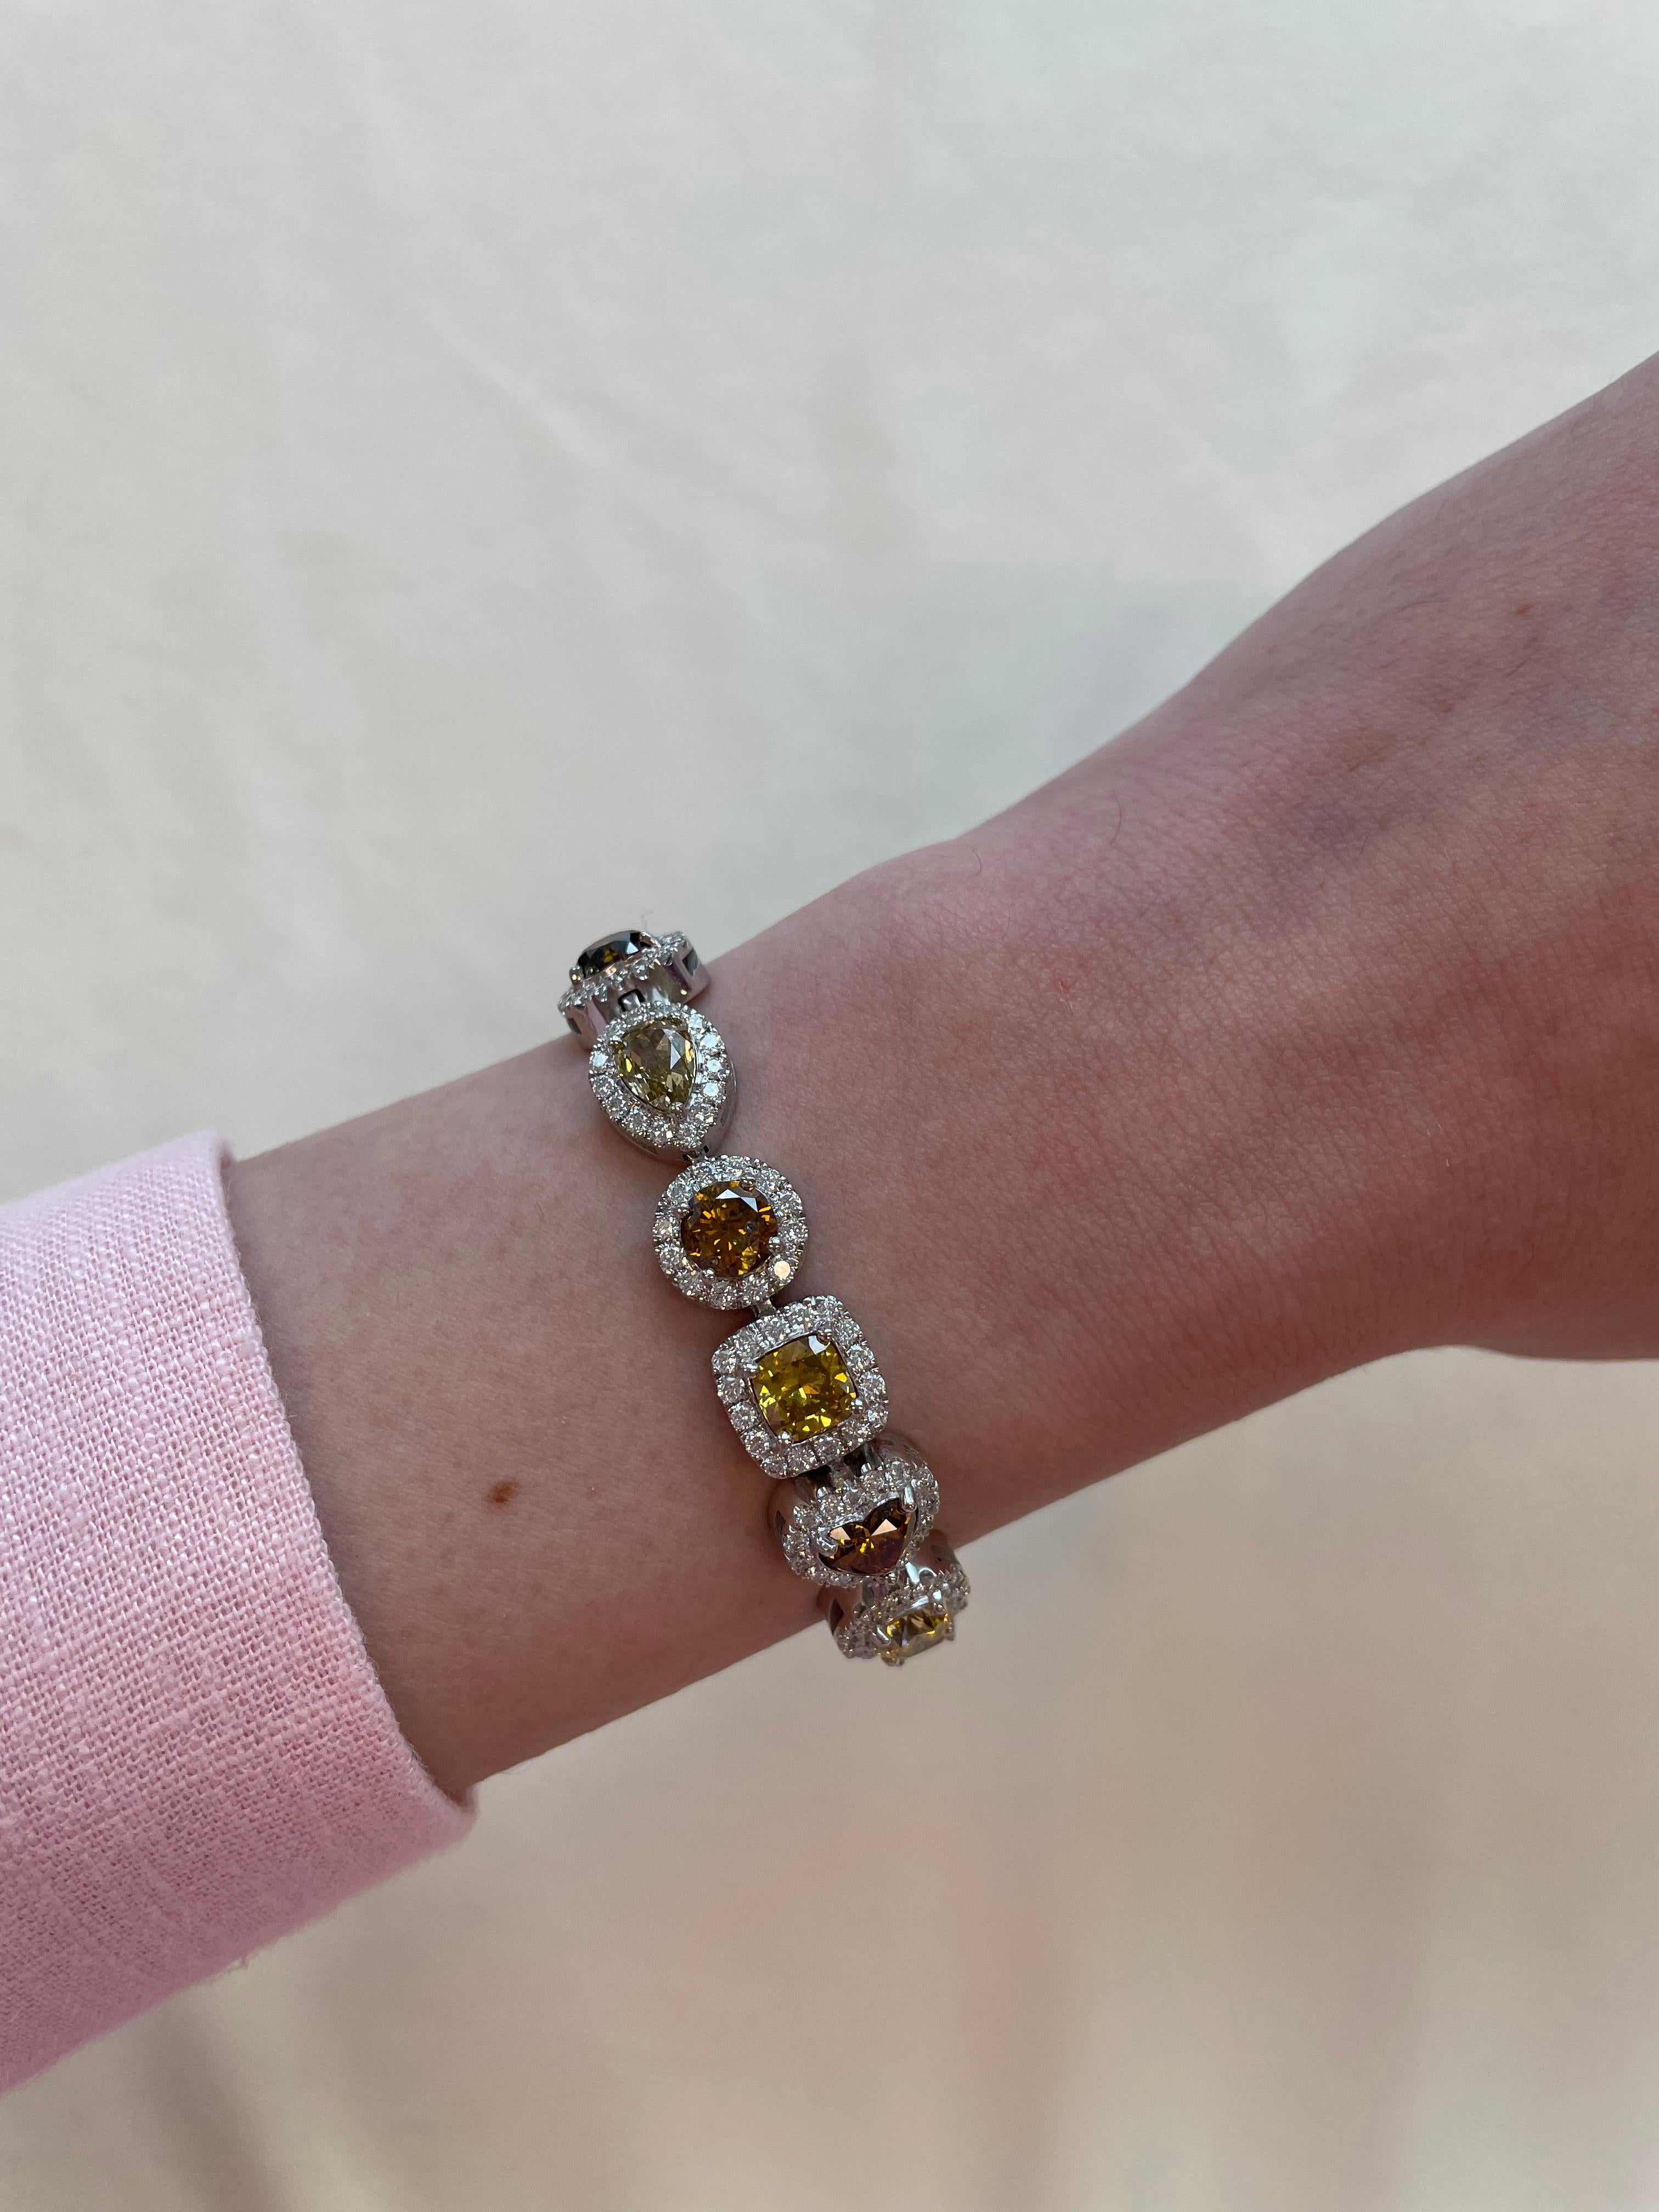 Stunning multi shape and color diamond bracelet with halo. All center stones GIA certified. High jewelry by Alexander Beverly Hills.
18.99 carats total diamond weight. 
16 center stone diamond, 16.11 carats. 4 heart, 3 cushion, 3 round brilliants, 3